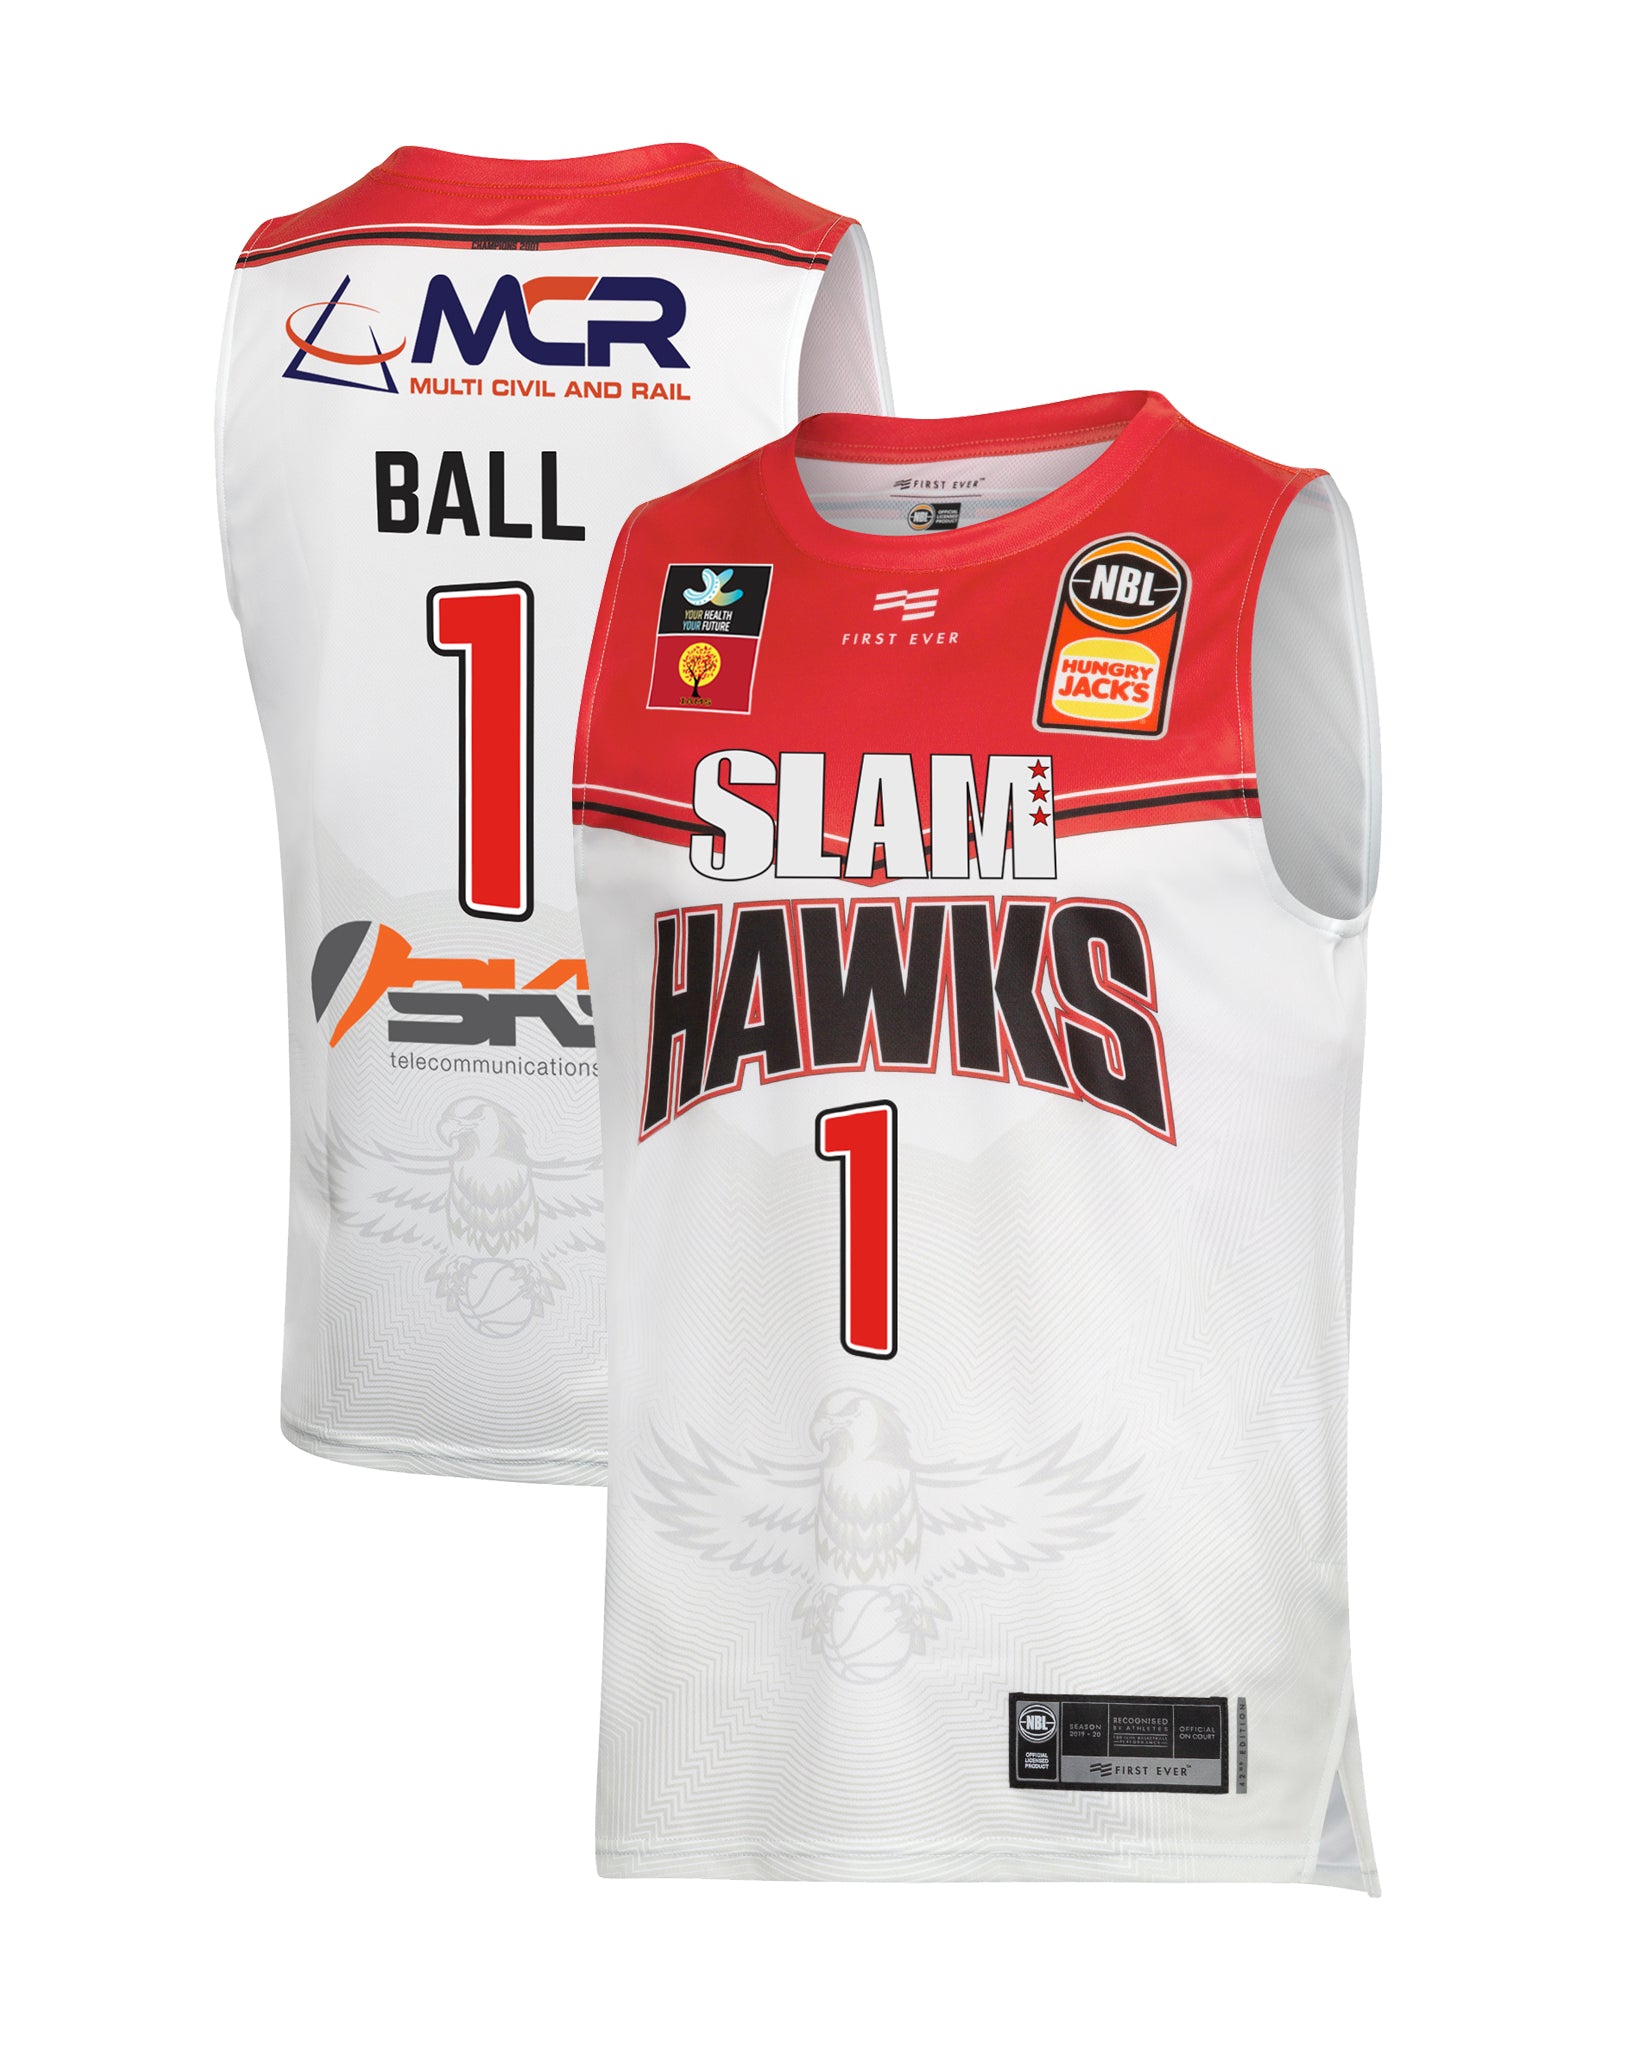 Illawarra Hawks Youth Kids Space Jam Authentic Jersey NBL Basketball by  Champion